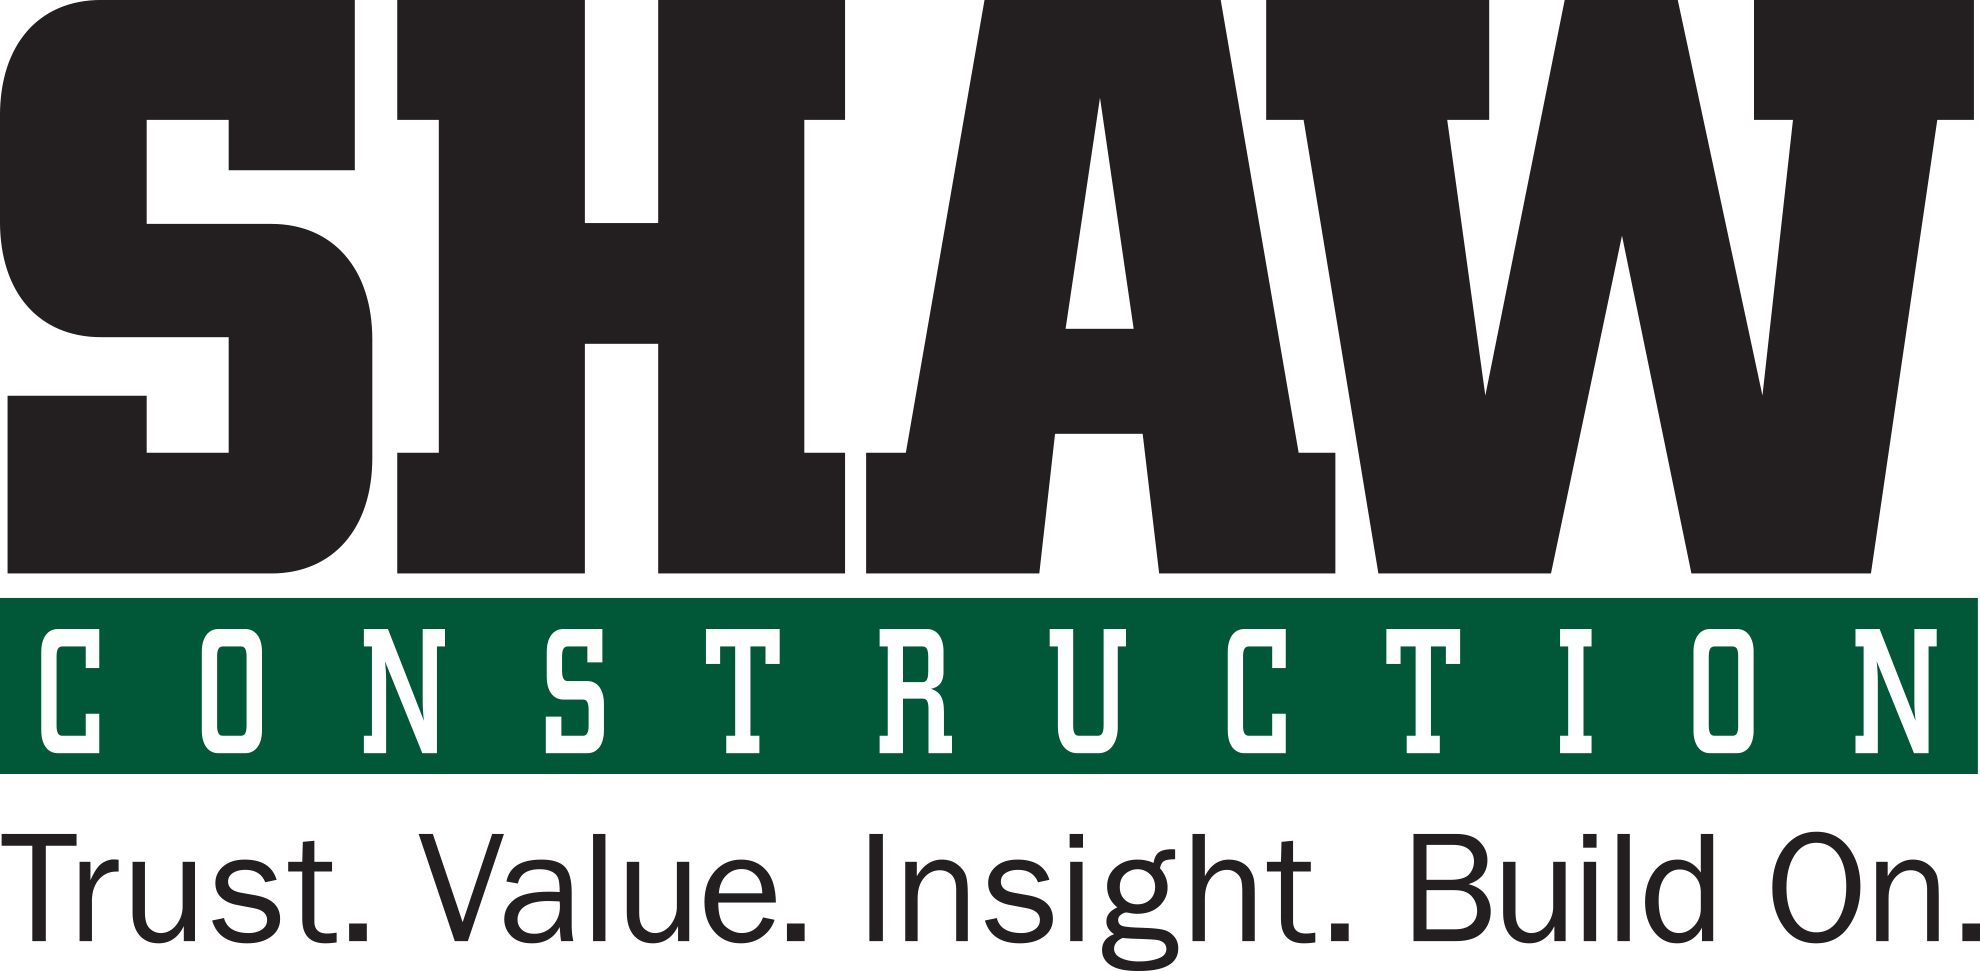 Shaw Construction logo - Links to website